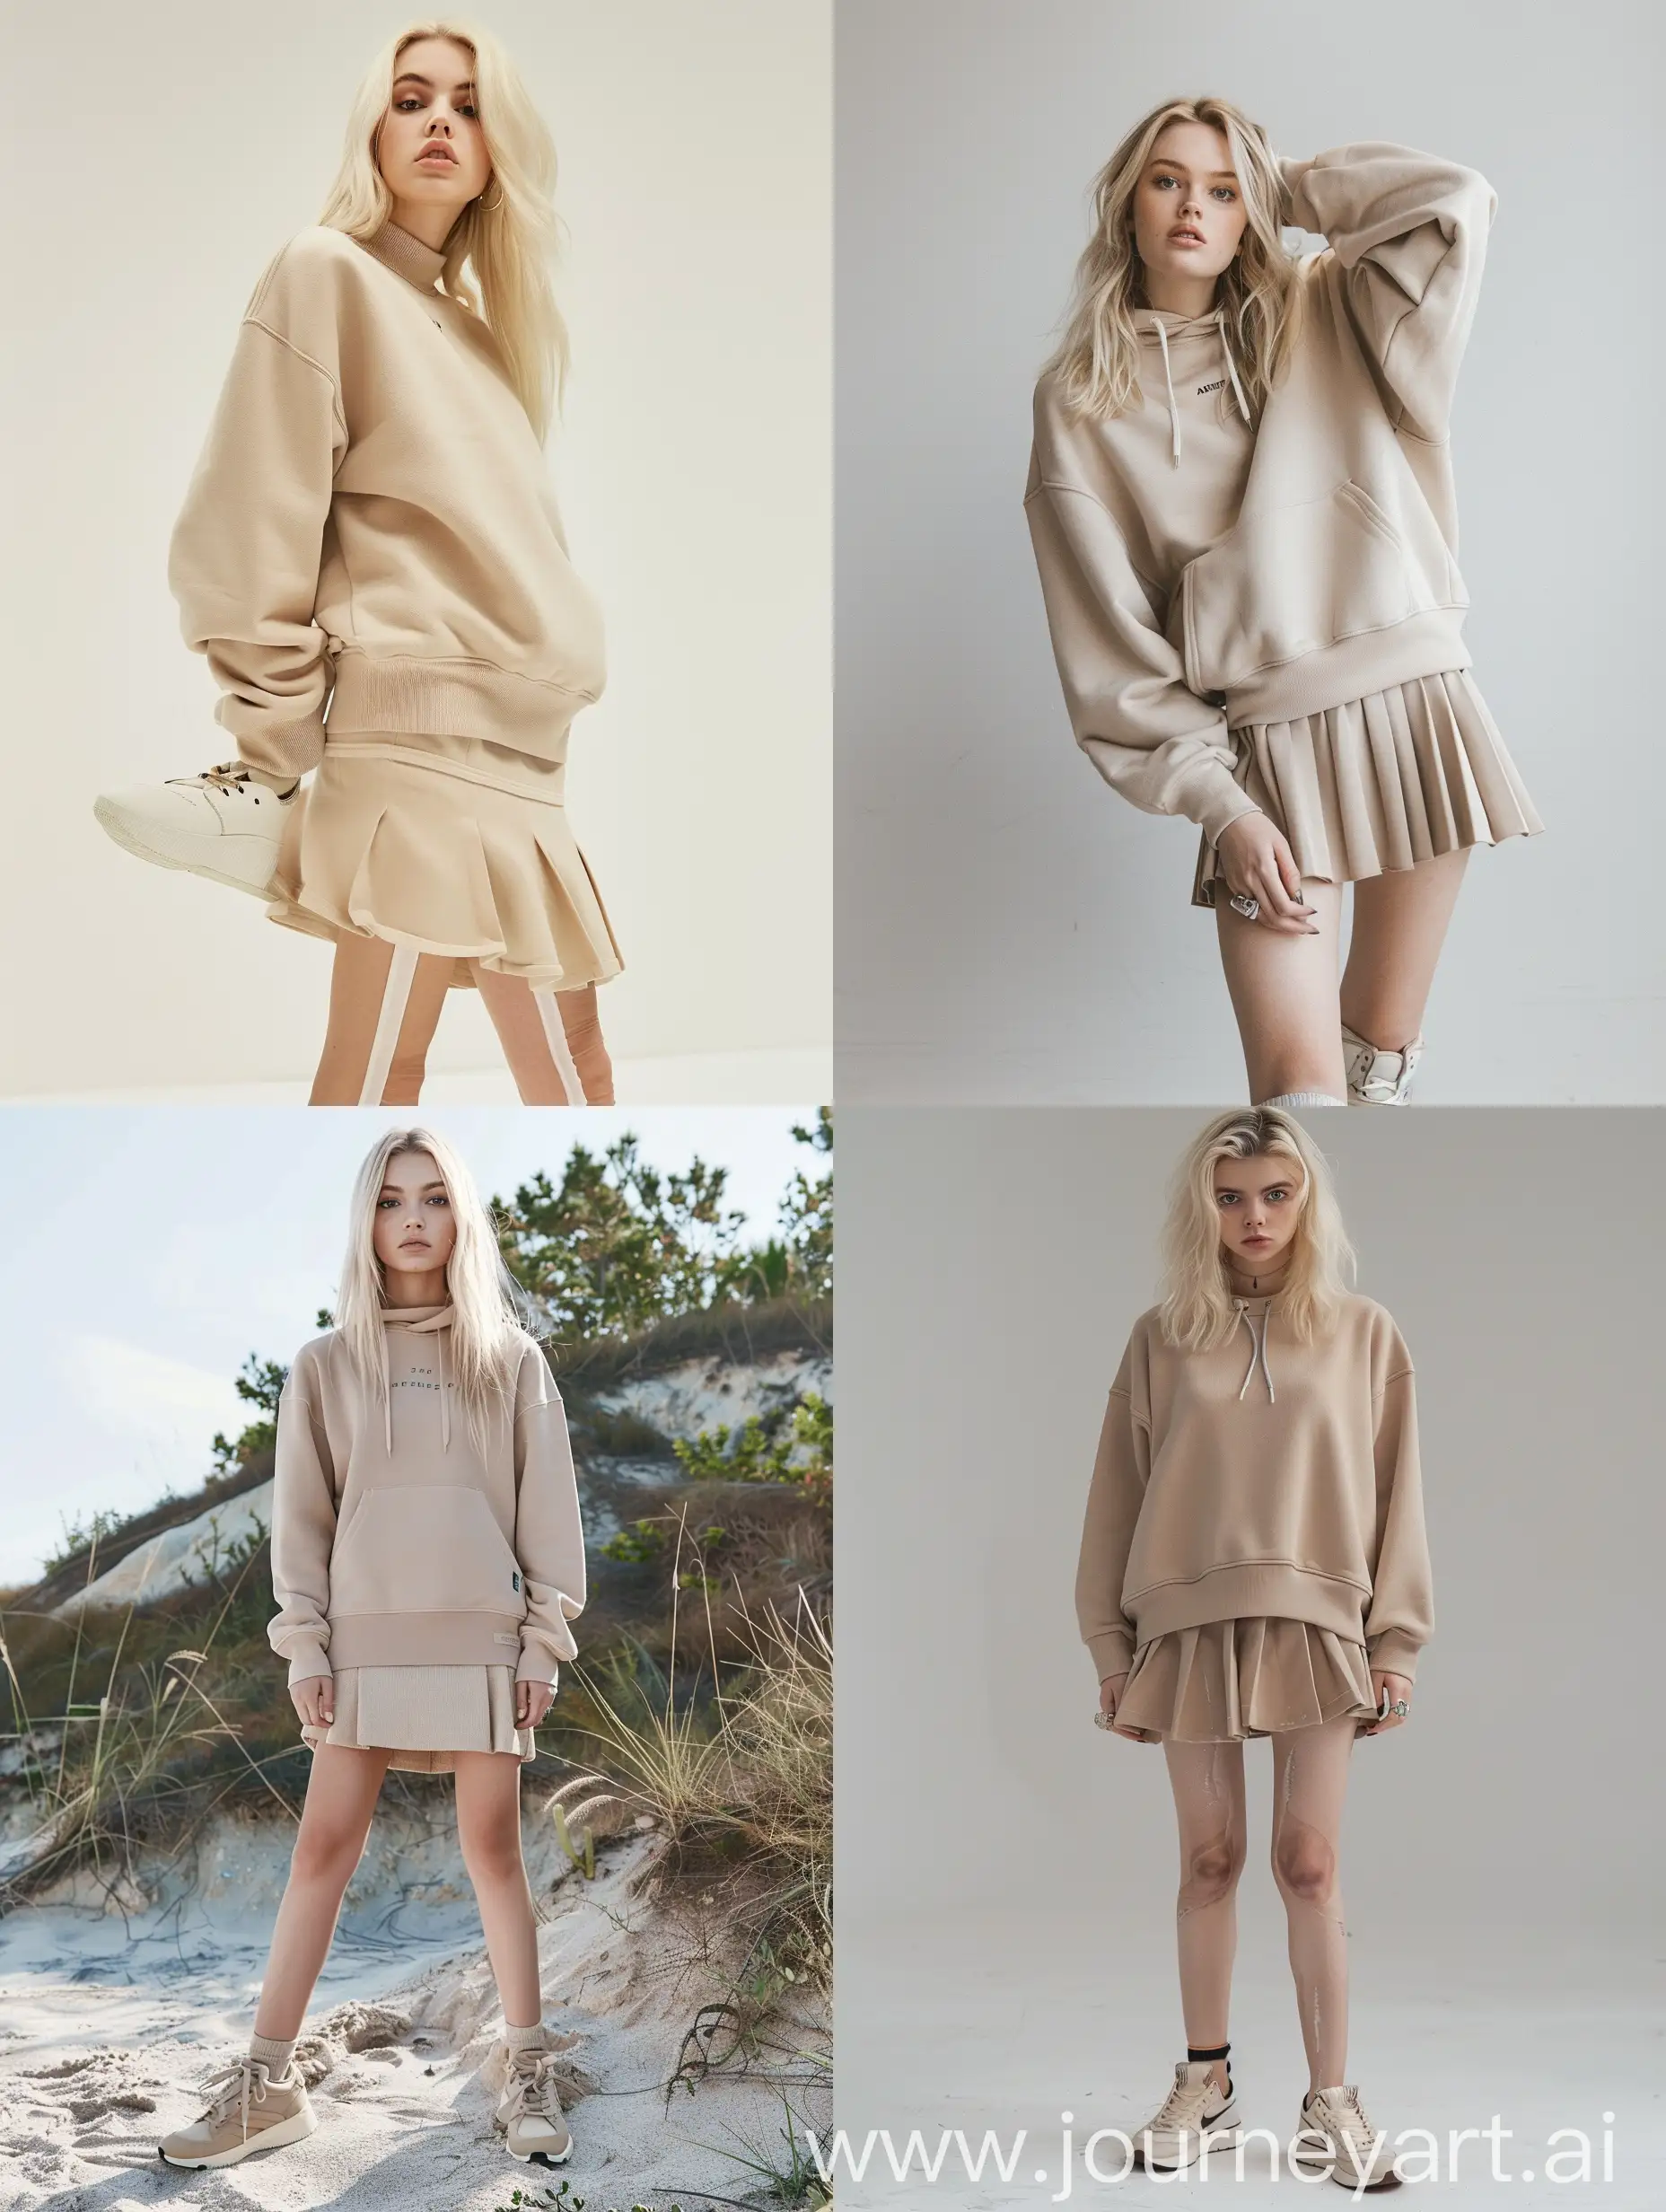 Blonde-Woman-in-Beige-Sweatshirt-and-Skirt-Standing-in-Full-Growth-with-Shoes